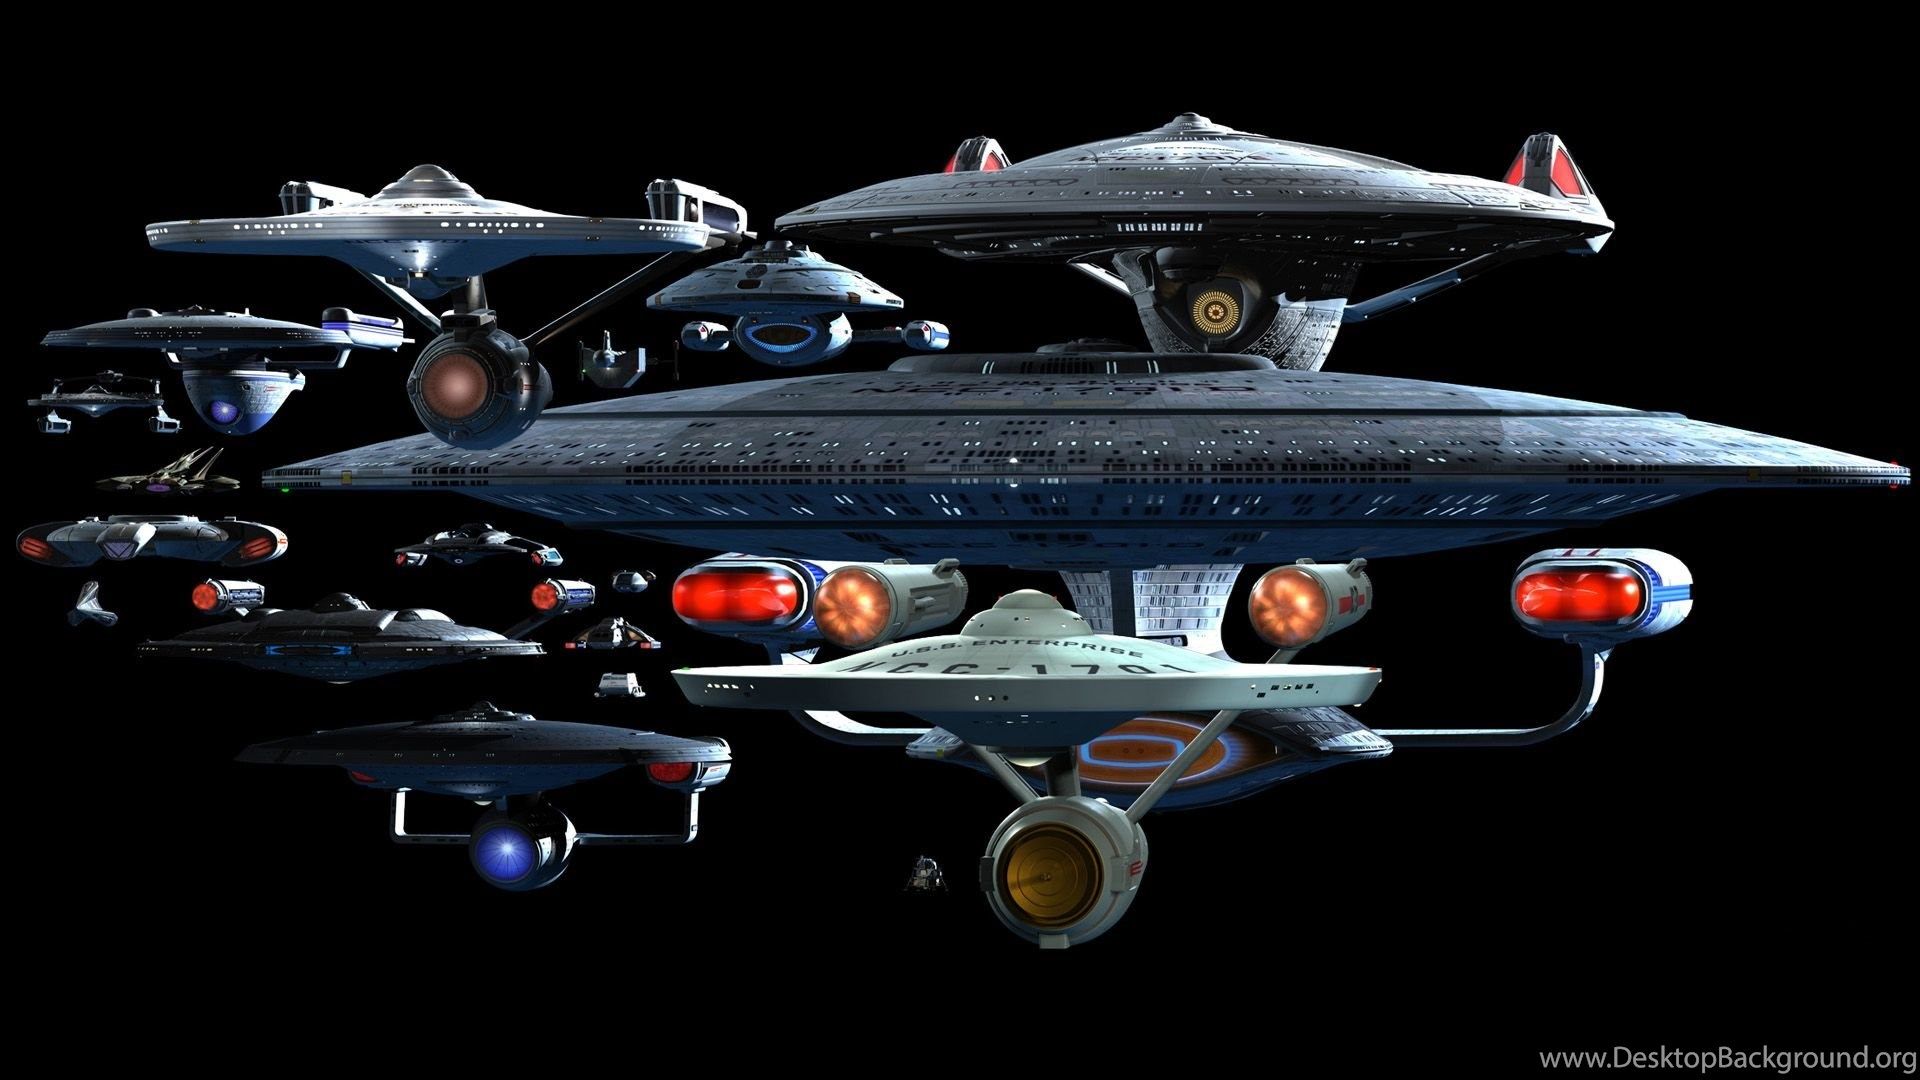 Star Trek Ships Of The Line, 1920x1080 HD Wallpaper And FREE Stock. Desktop Background